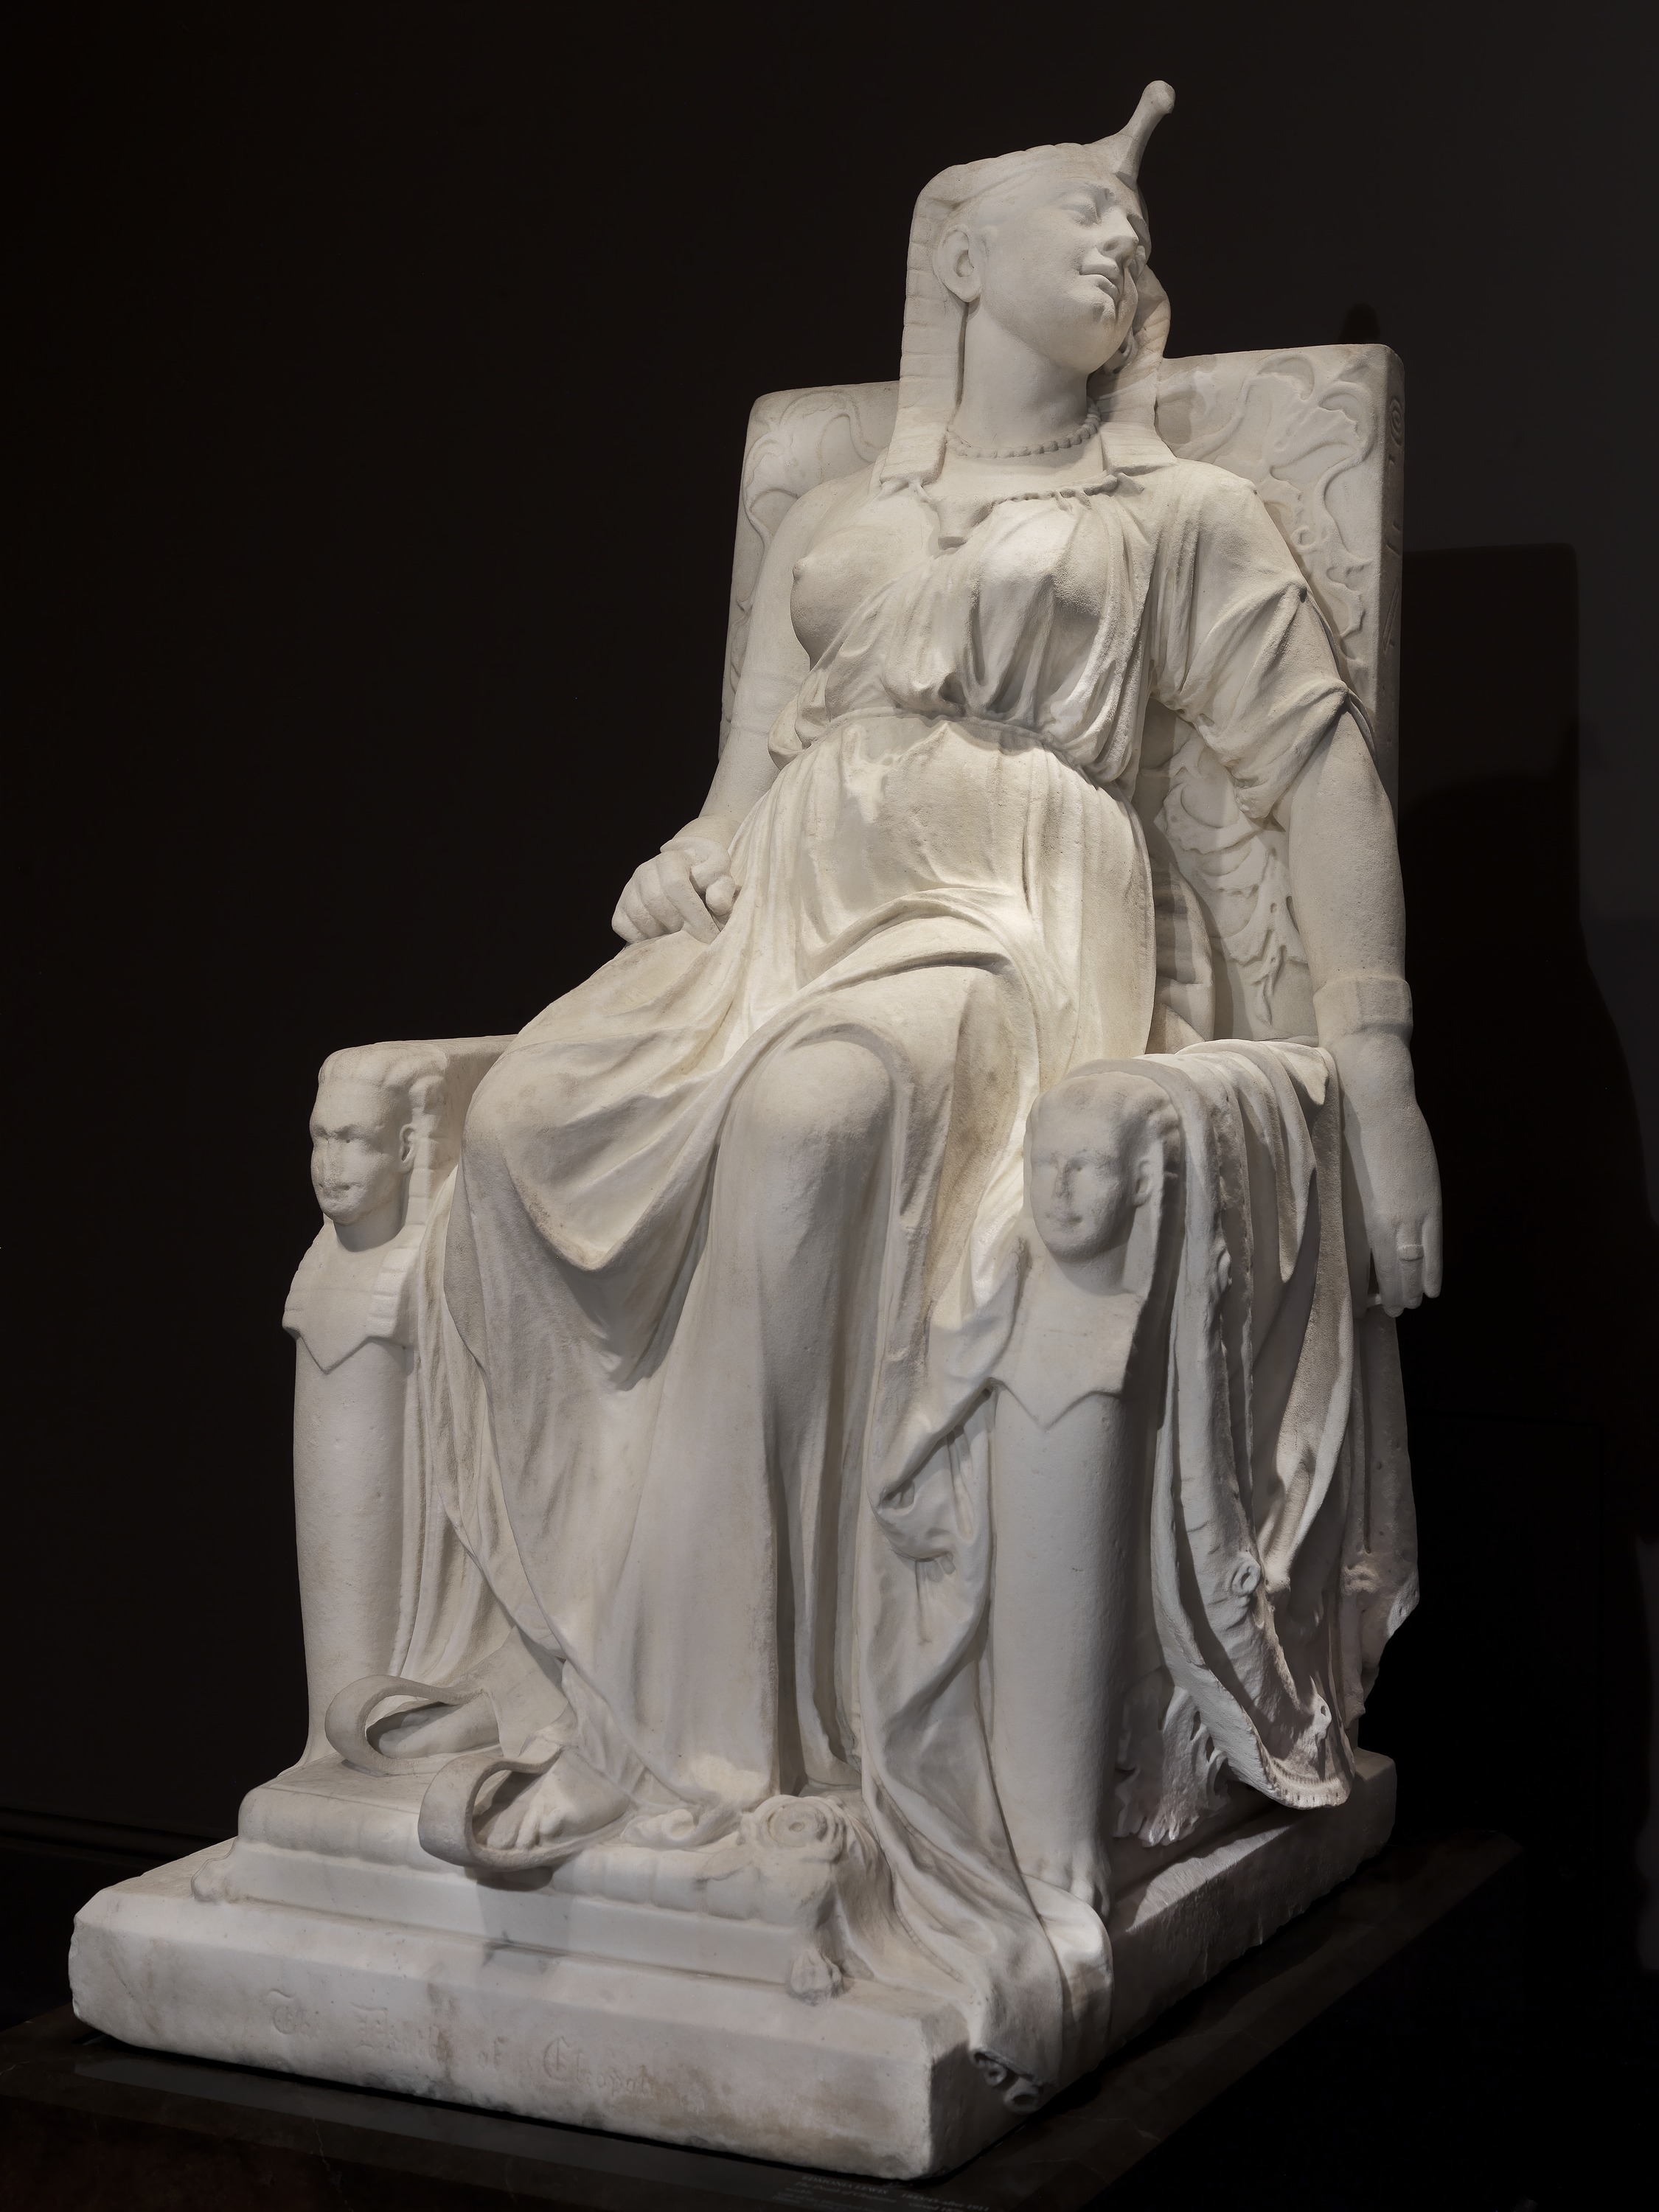 The Death of Cleopatra by Edmonia Lewis - 1876 - 160.0 x 79.4 x 116.8 cm. Smithsonian American Art Museum